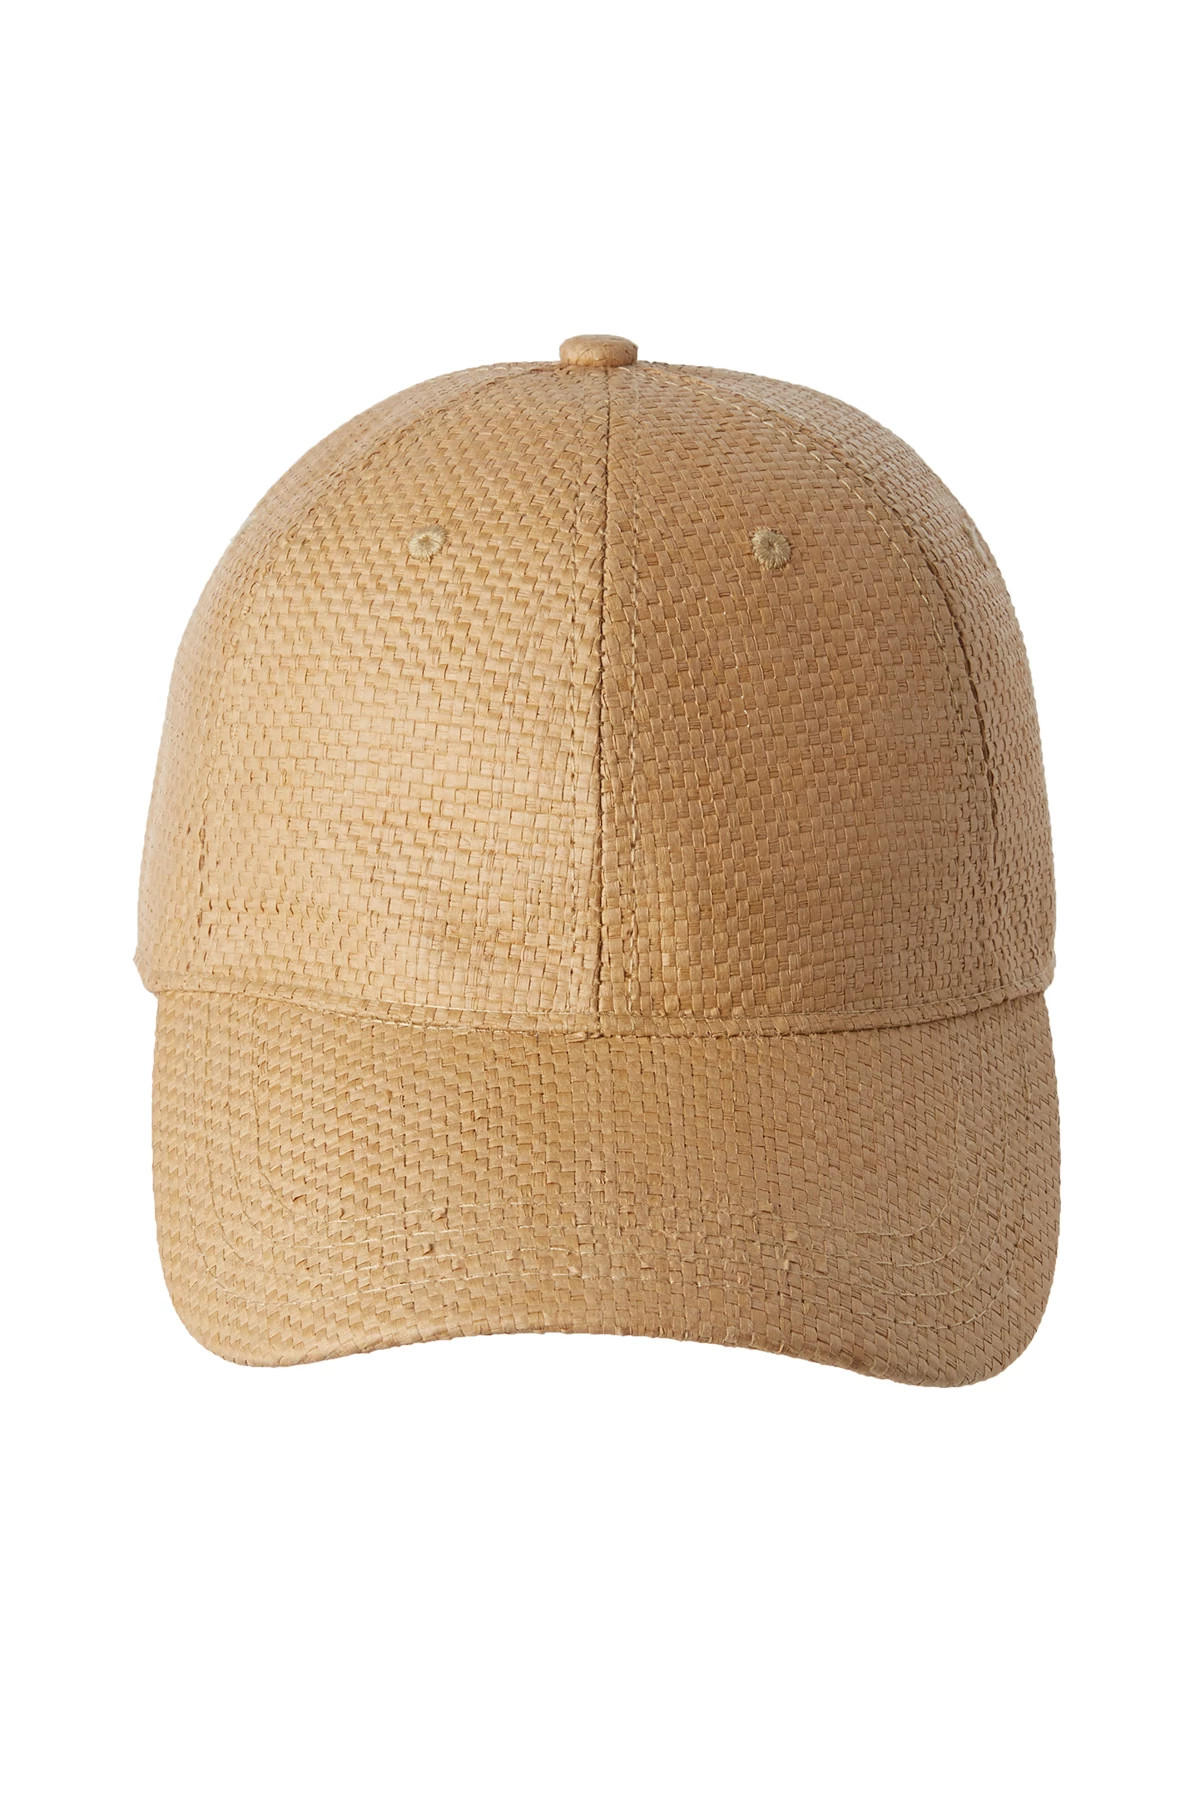 Woven Straw Baseball Cap image number 1